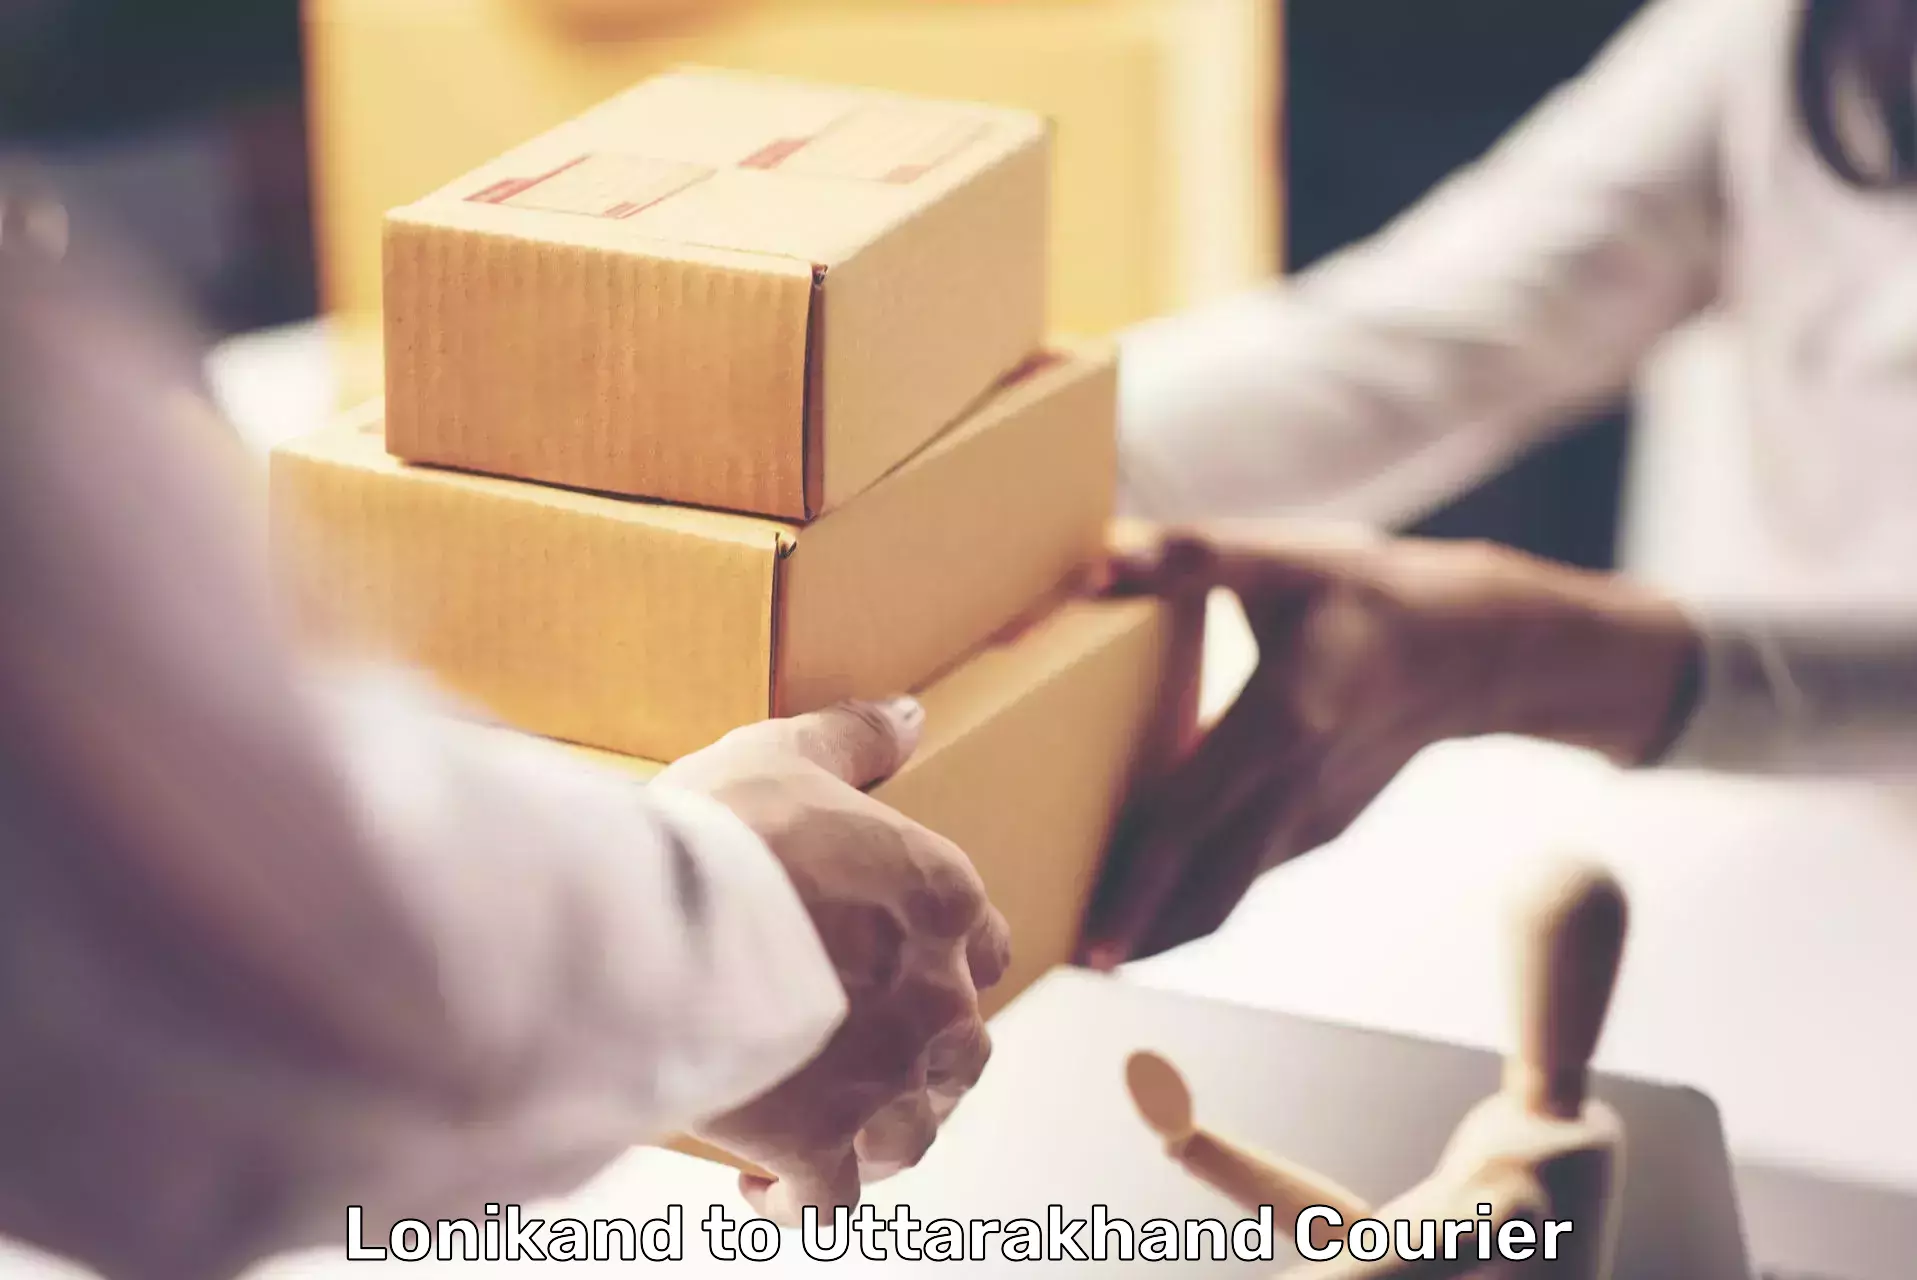 Automated parcel services Lonikand to Lansdowne